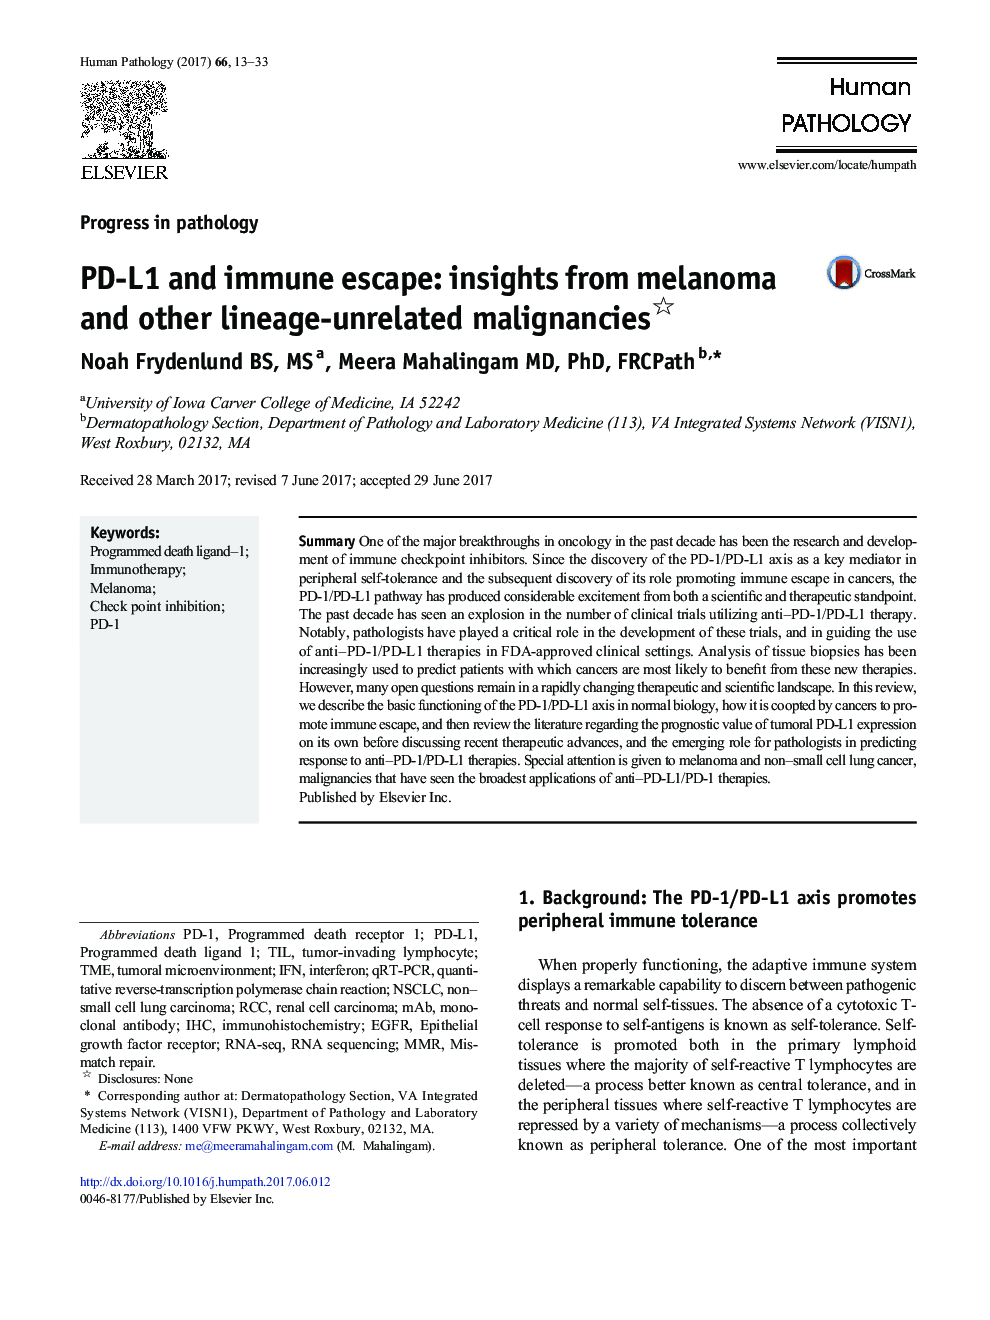 Progress in pathologyPD-L1 and immune escape: insights from melanoma and other lineage-unrelated malignancies